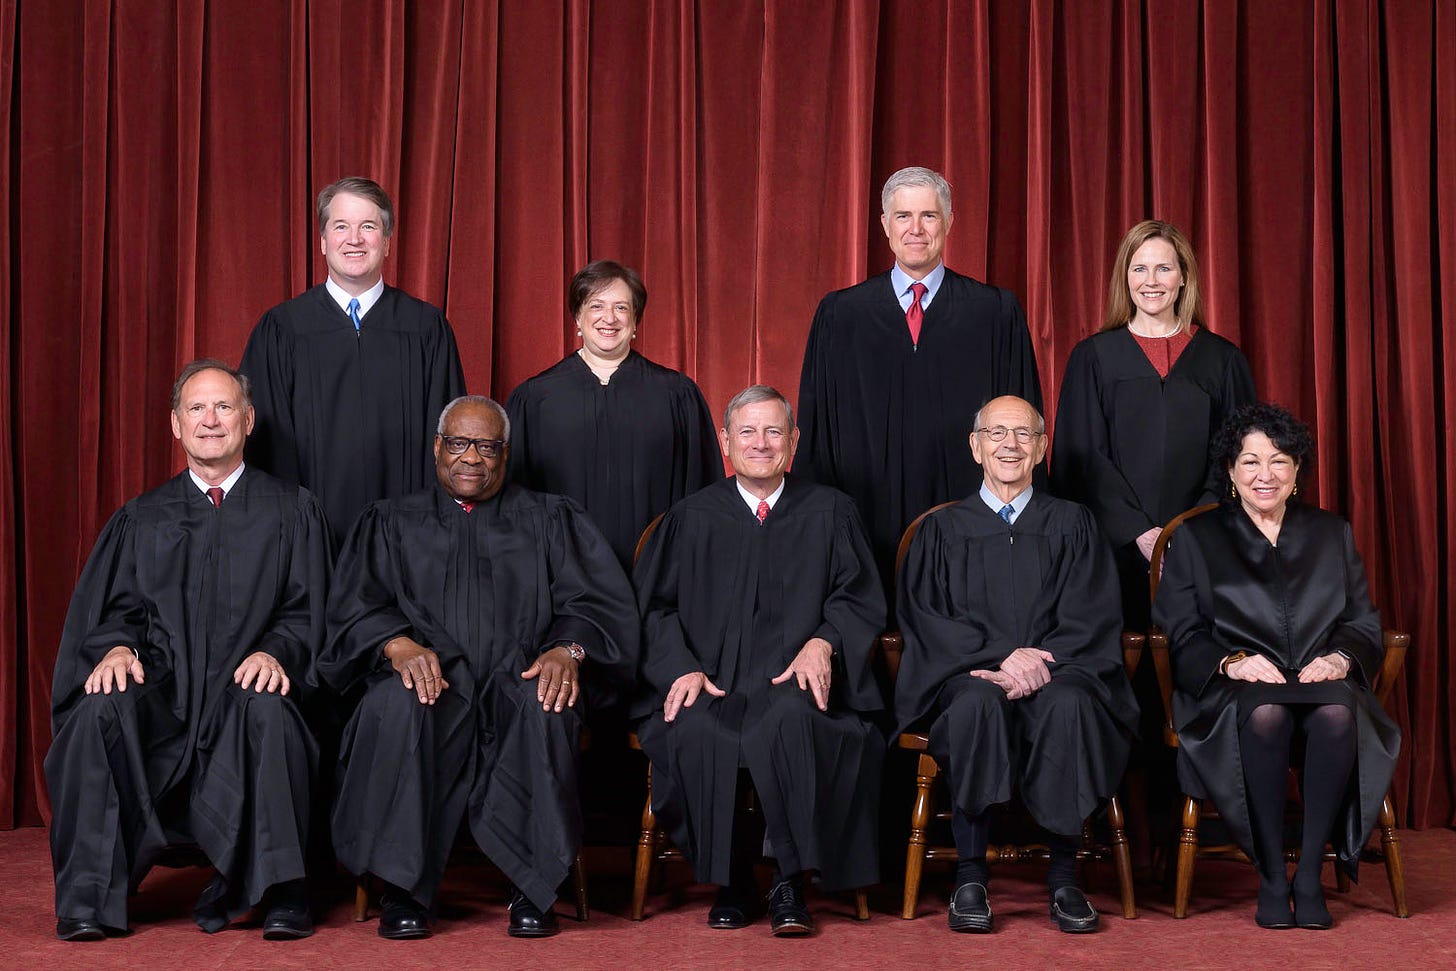 The Supreme Court as composed October 27, 2020 to present